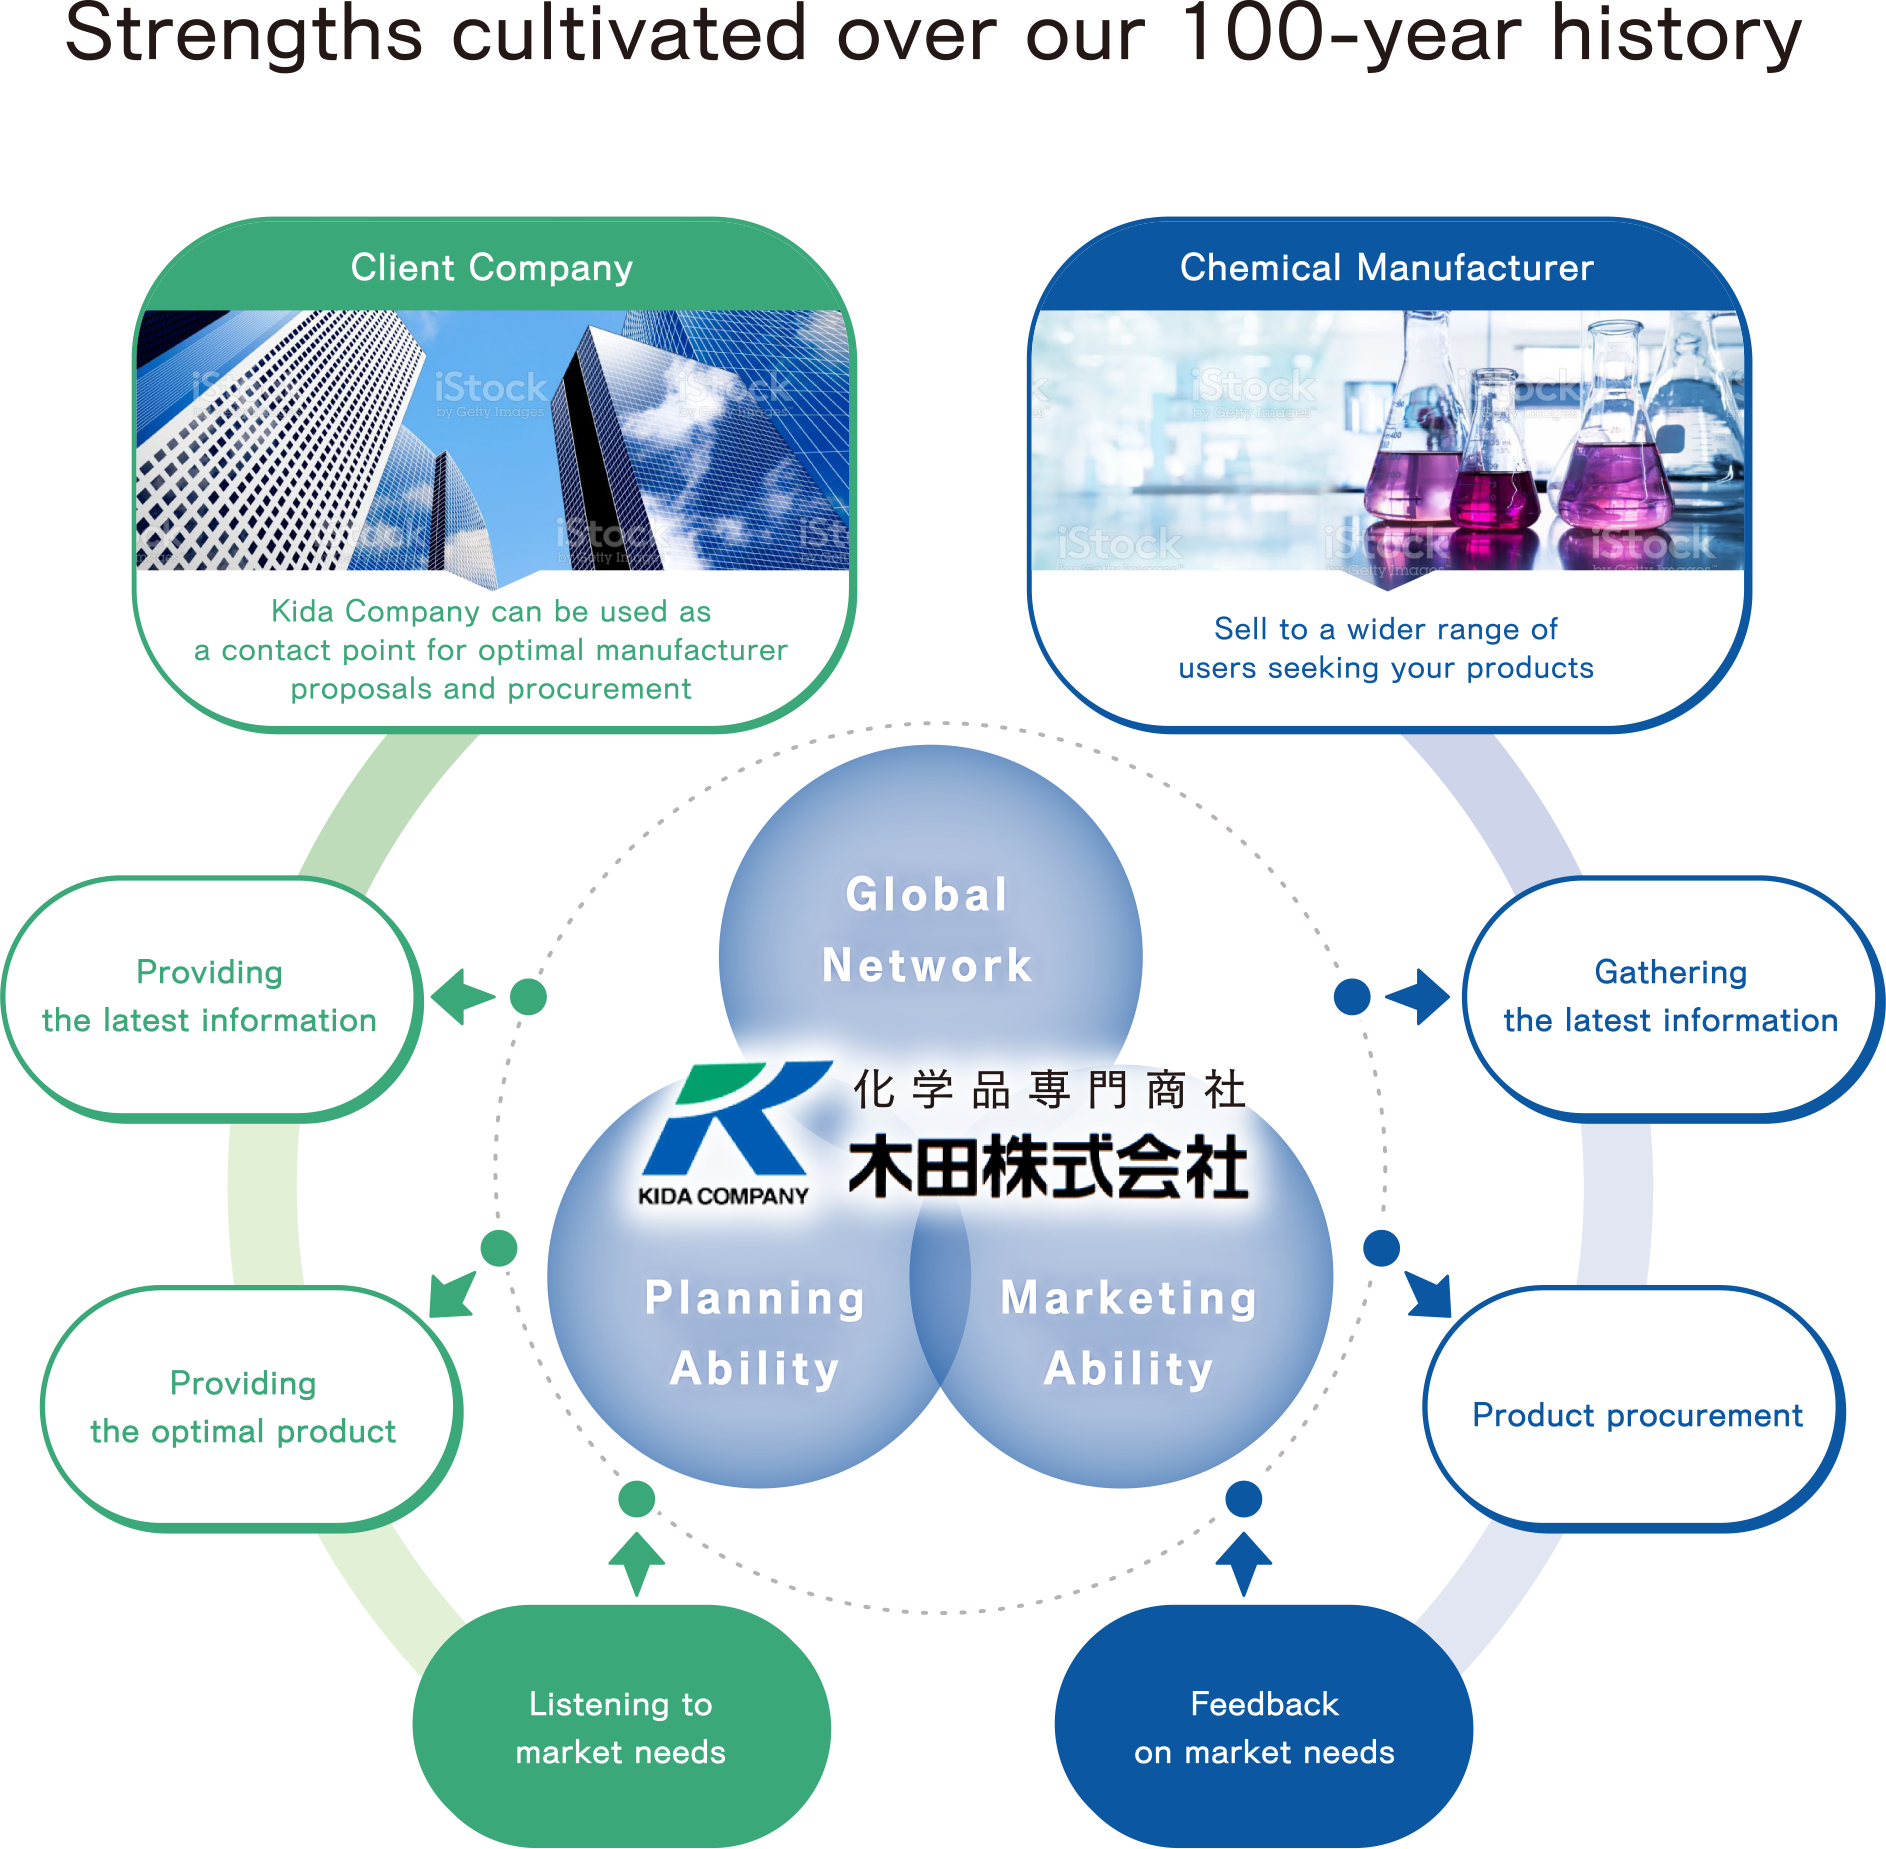 Strengths cultivated over our 100-year history